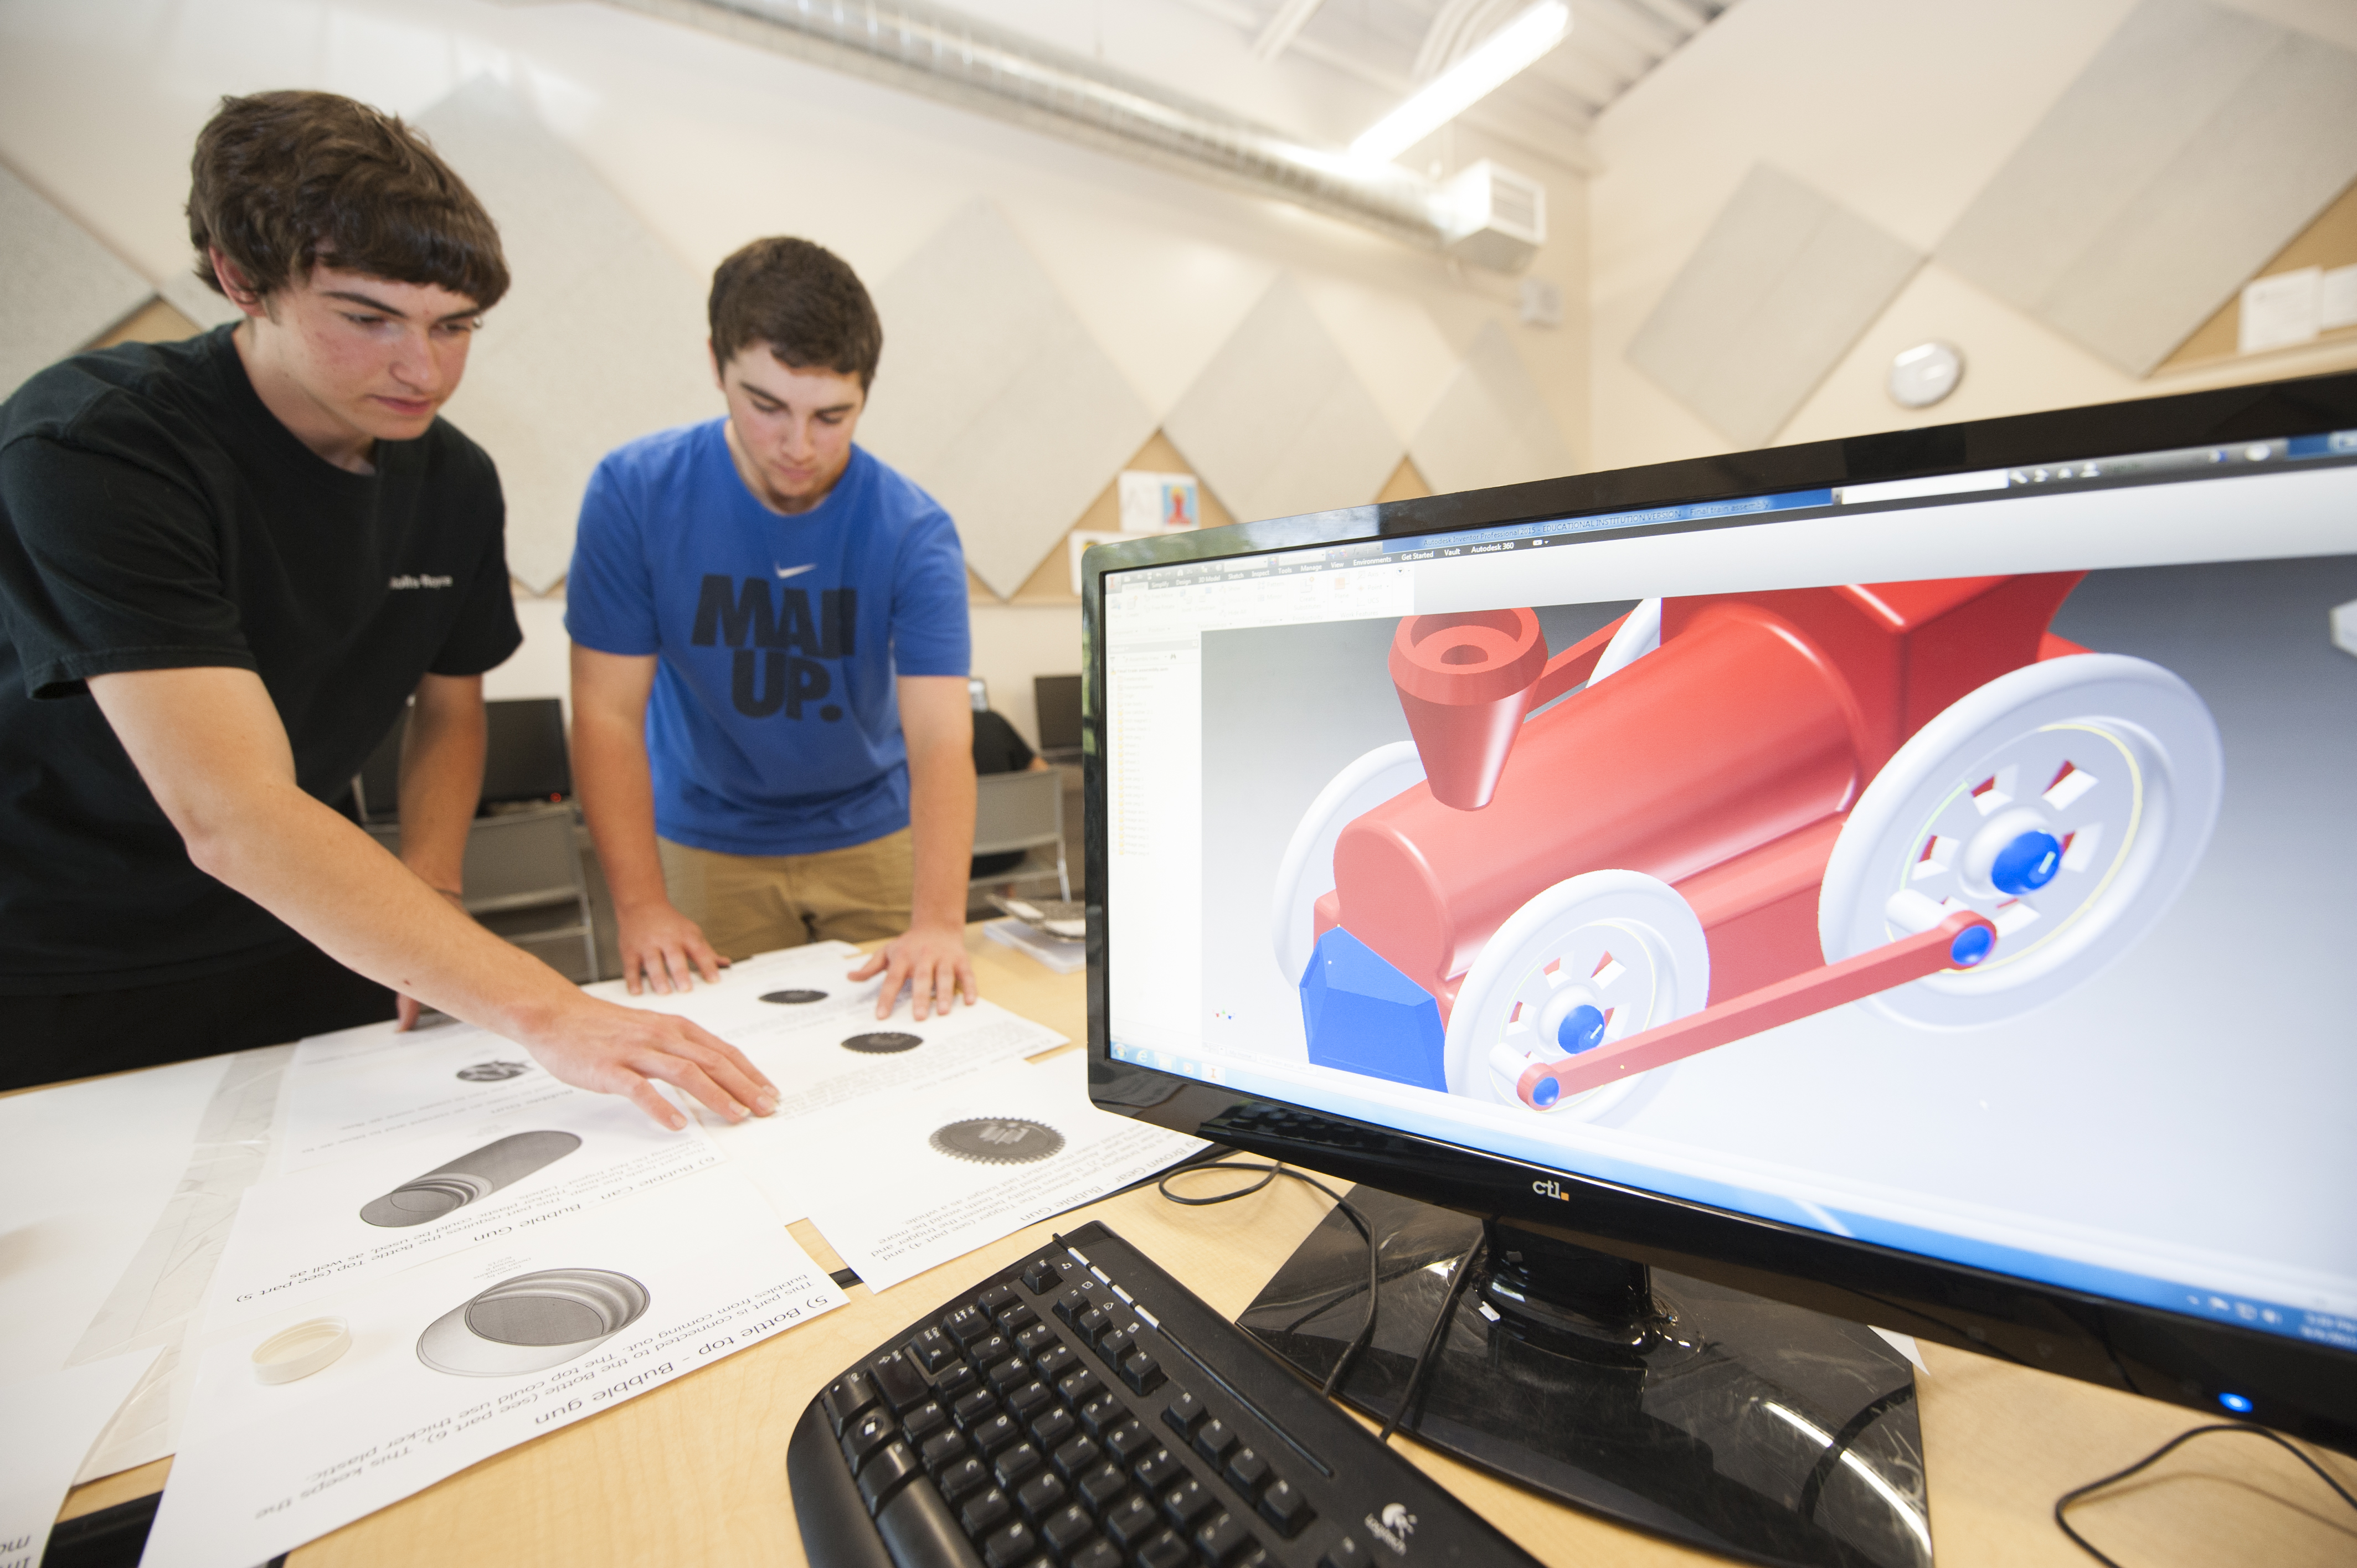 Students looking at a printout of a CAD design